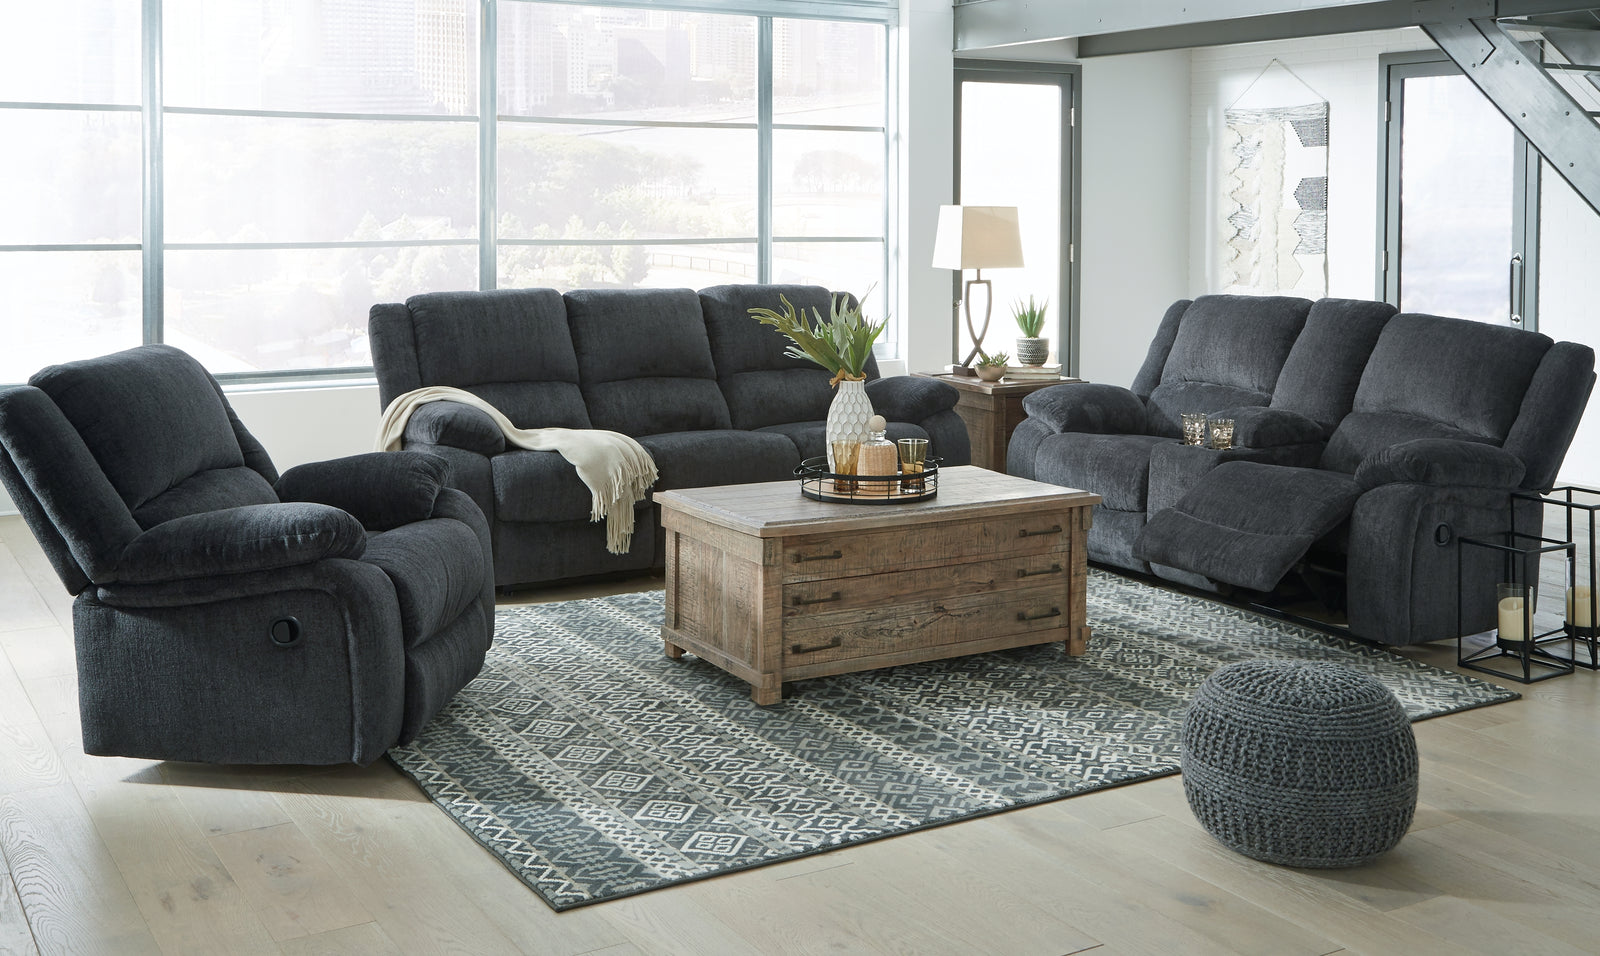 Draycoll Slate Sofa, Loveseat And Recliner